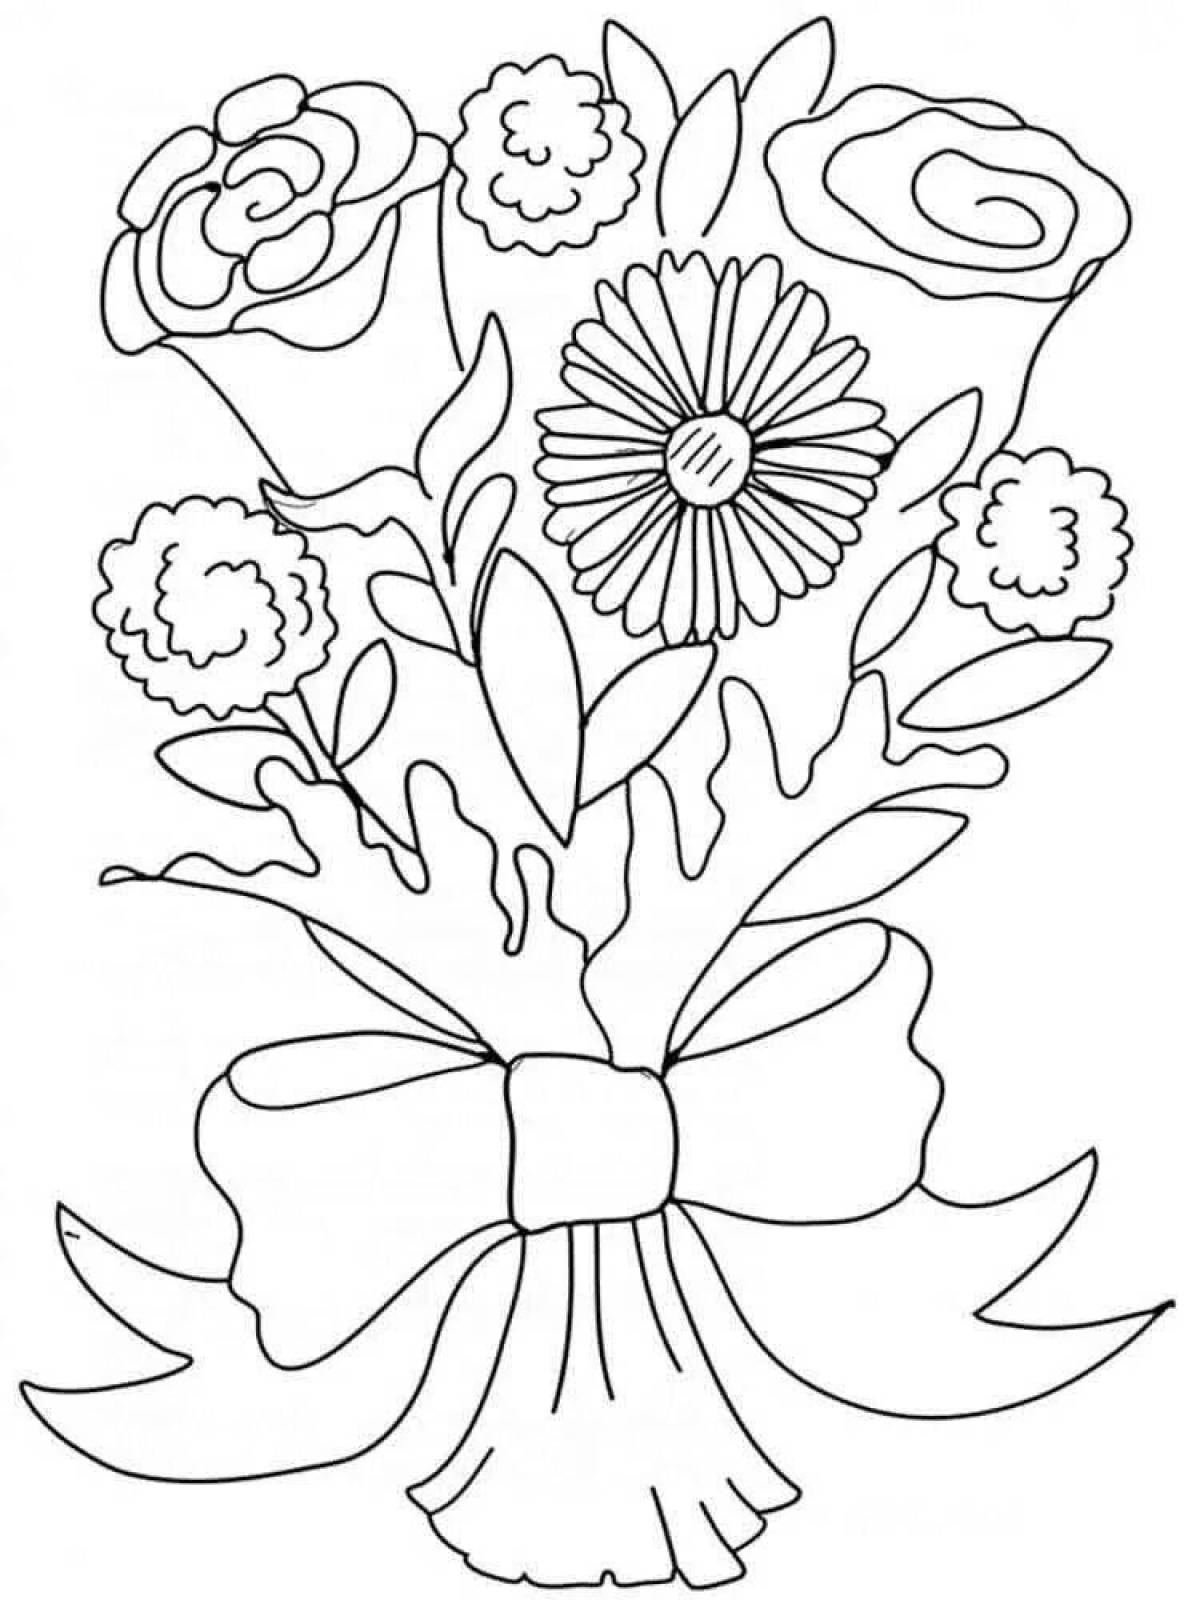 Adorable bouquet coloring book for kids